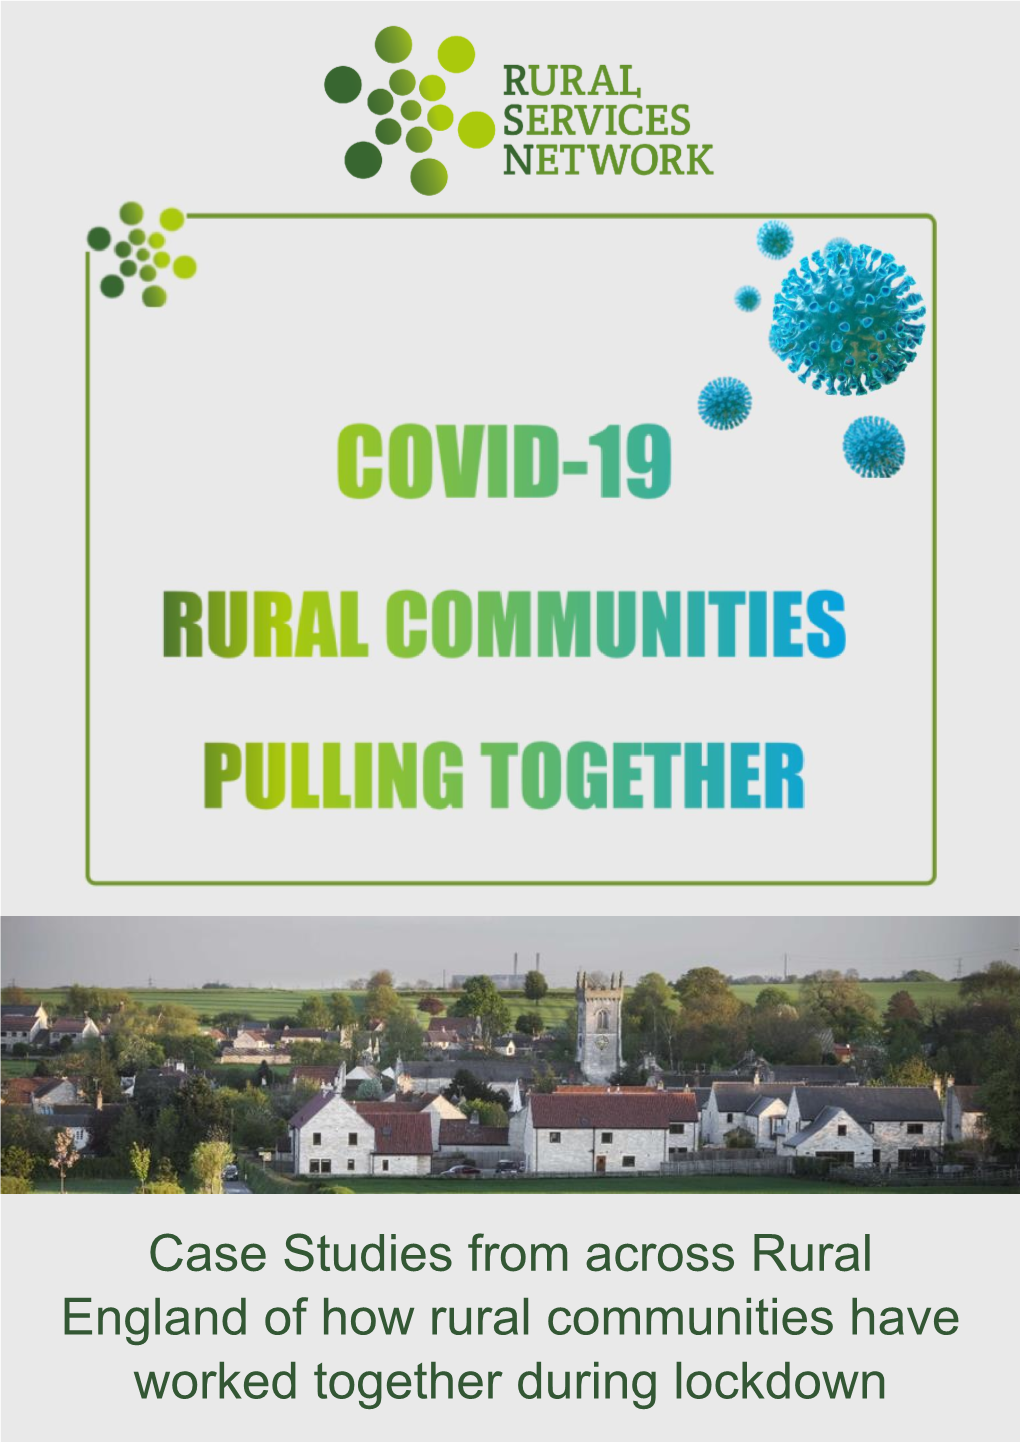 Case Studies from Across Rural England of How Rural Communities Have Worked Together During Lockdown Rural Services Network – Rural Communities Pulling Together